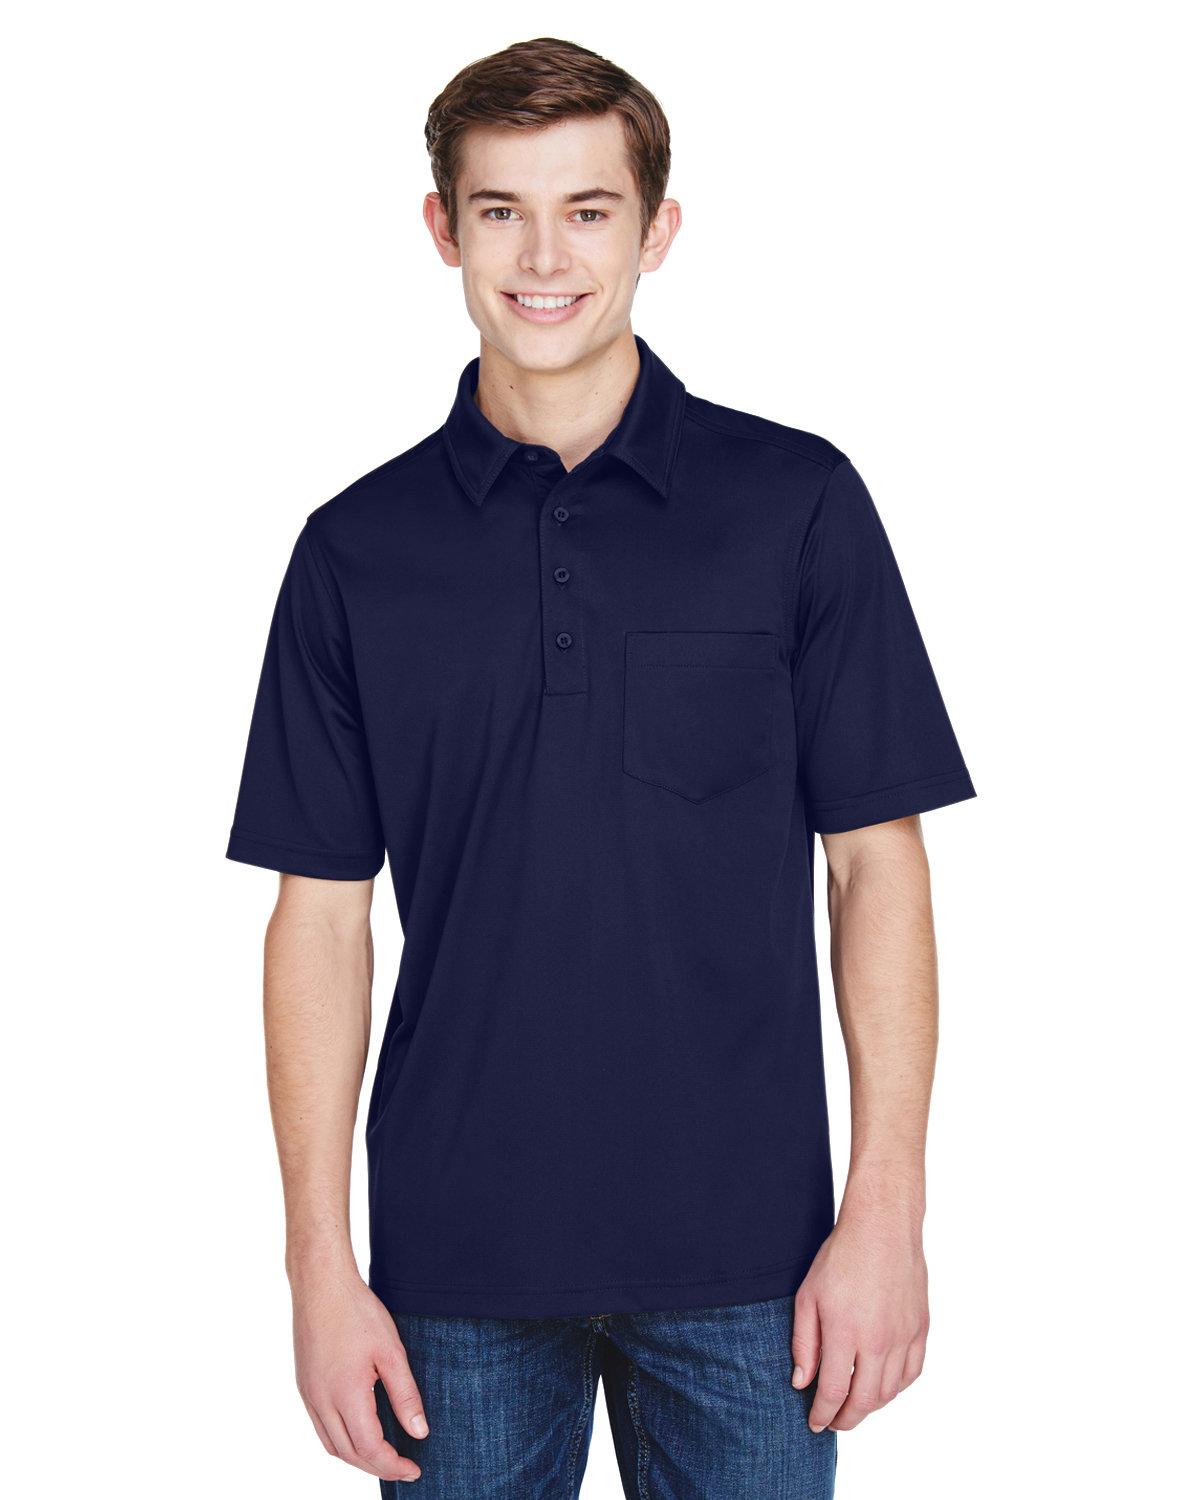 Extreme Men's Tall Eperformance™ Shift Snag Protection Plus Polo CLASSIC NAVY 